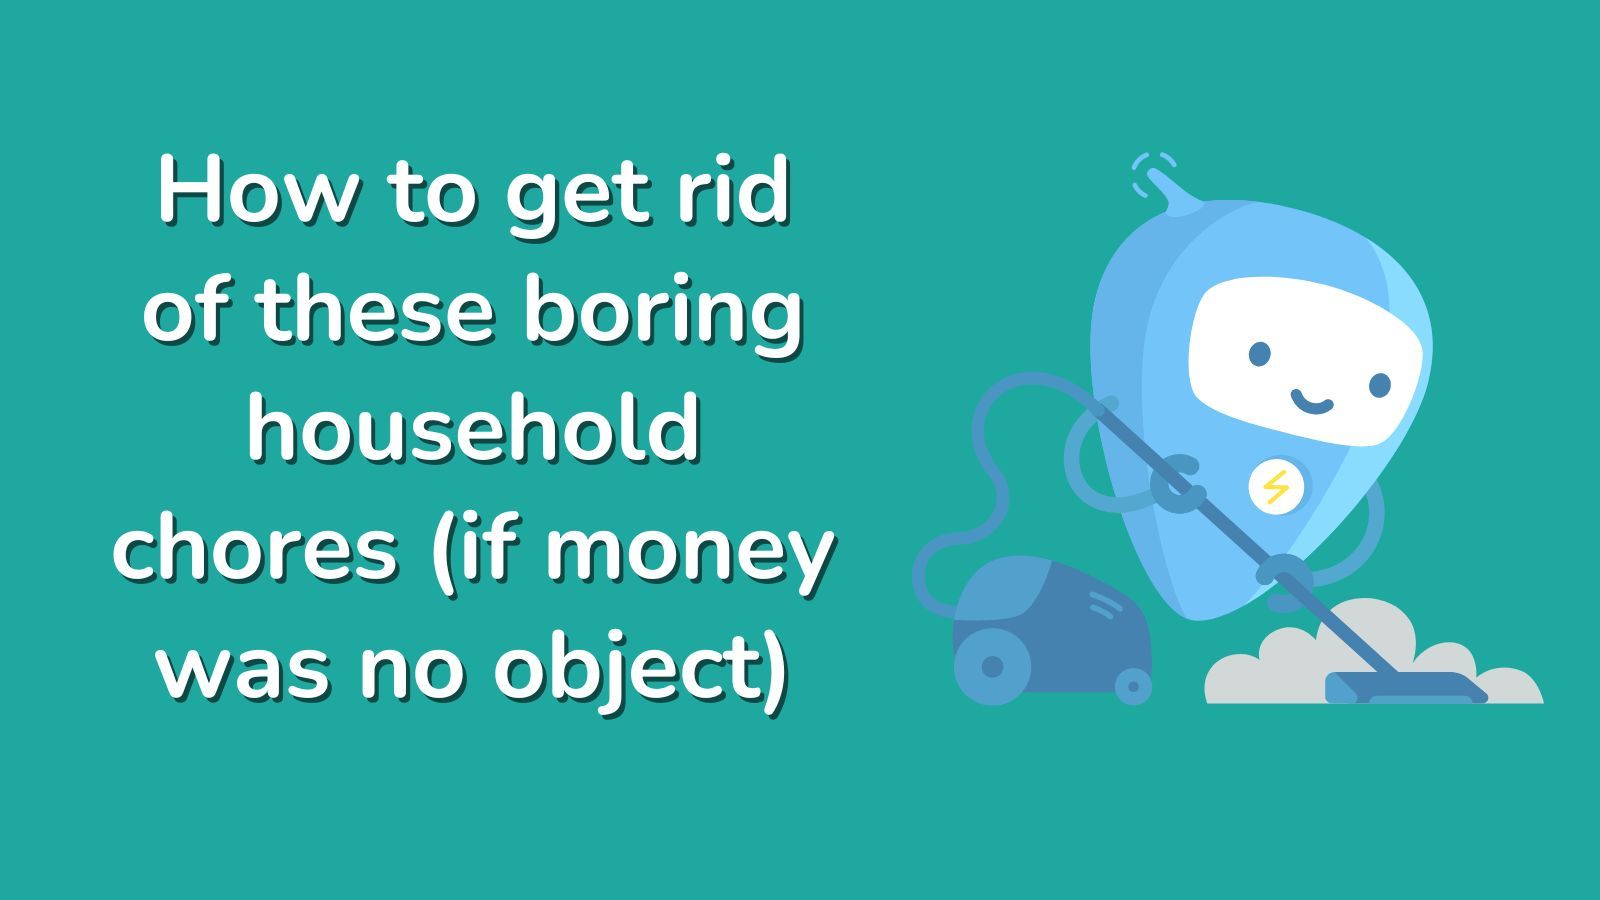 How to get rid of these boring household chores (if money was no object)